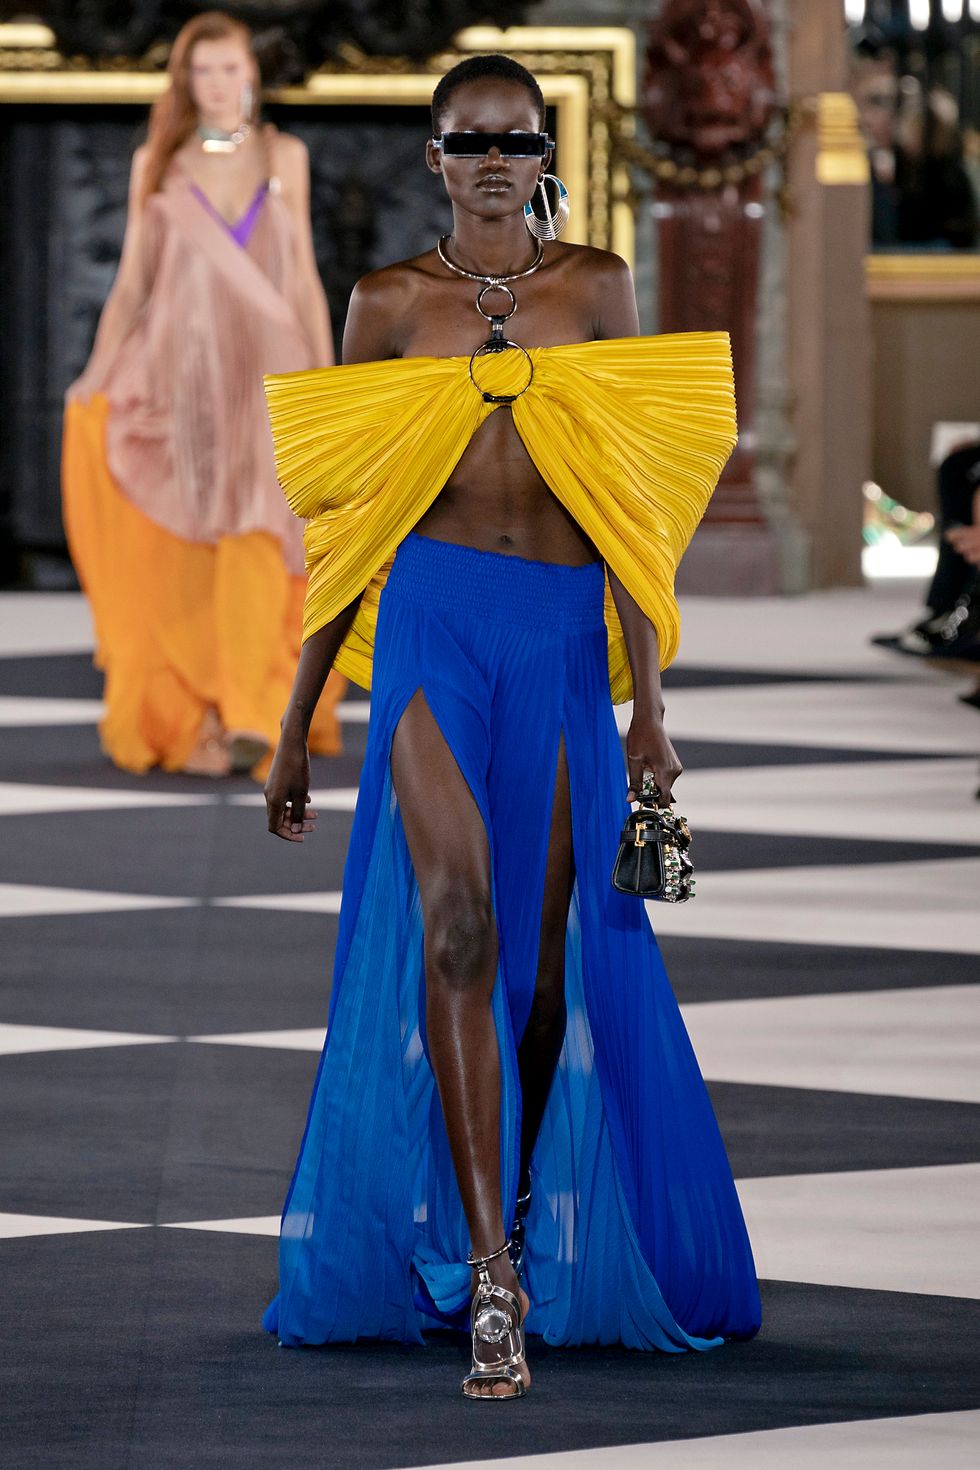 The 10 Biggest Paris Fashion Week Trends for Spring 2020 - PAPER